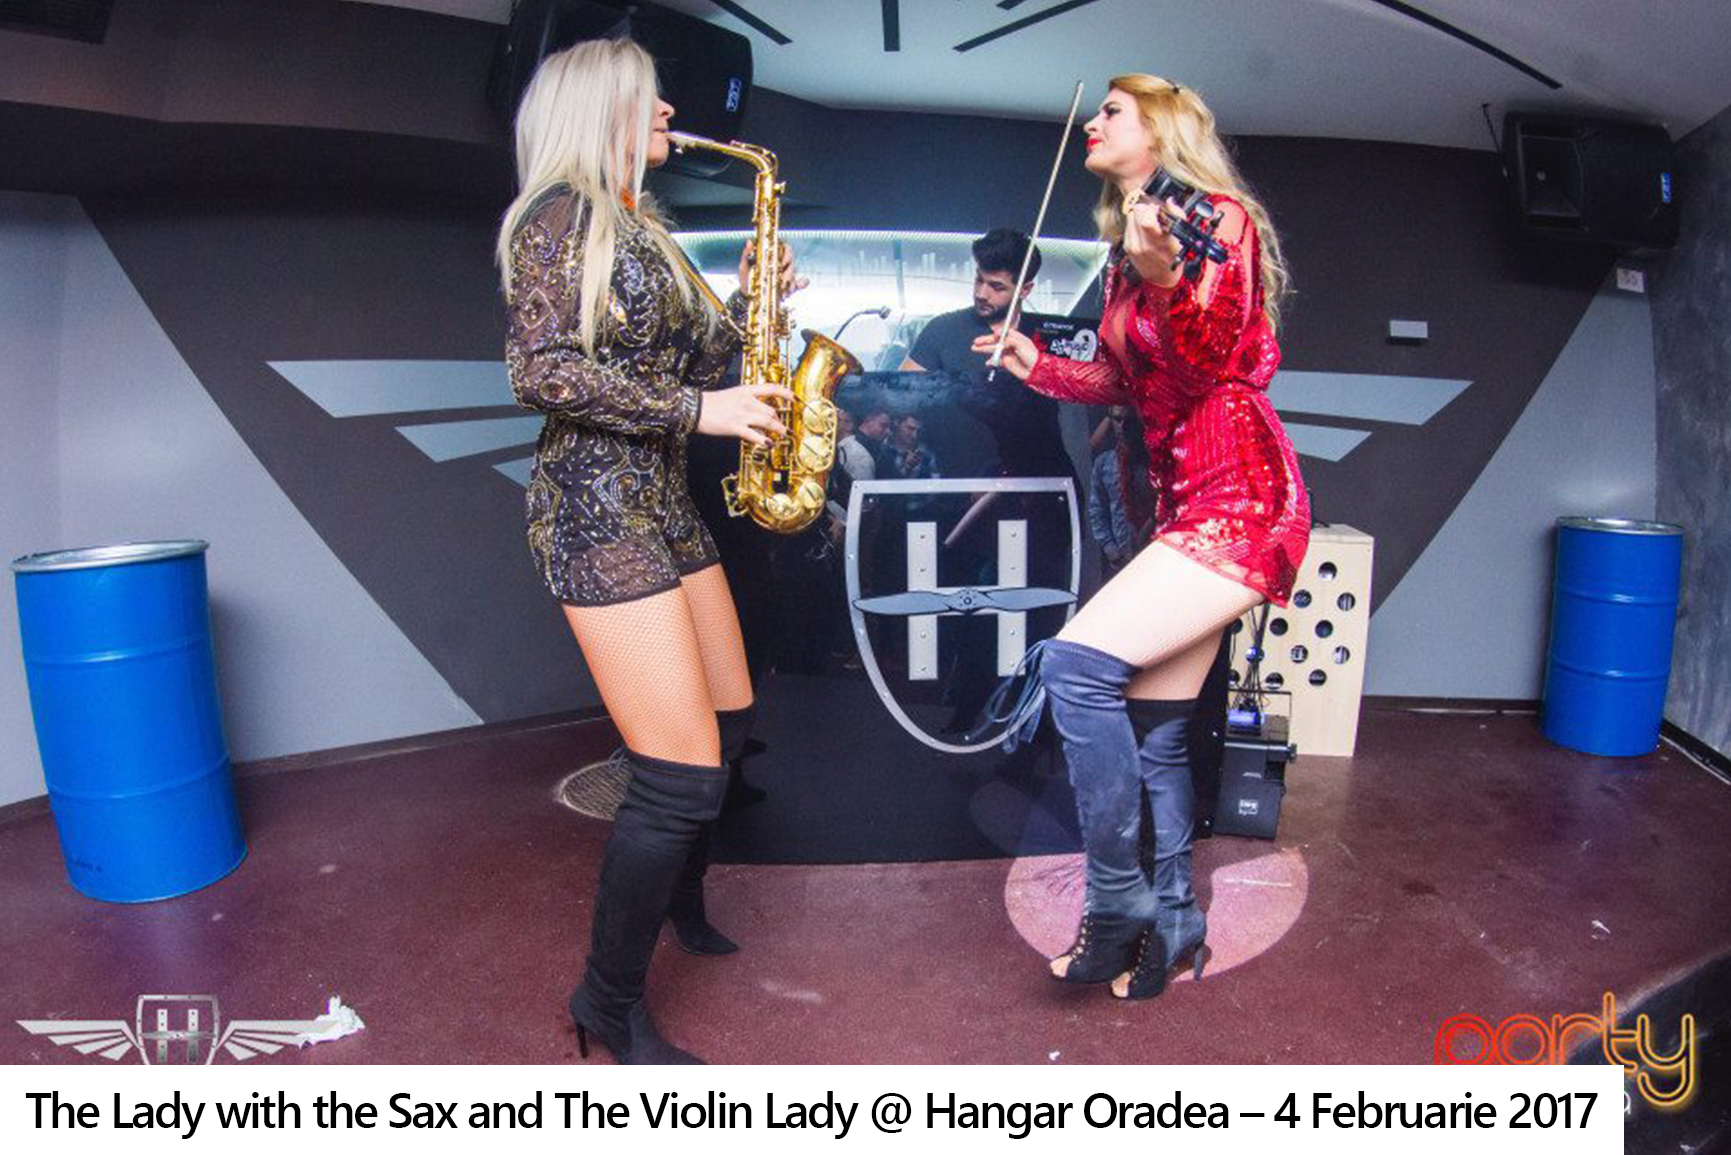 Galerie foto – The Lady with the Sax and The Violin Lady @ Hangar Oradea – 4 Februarie 2017